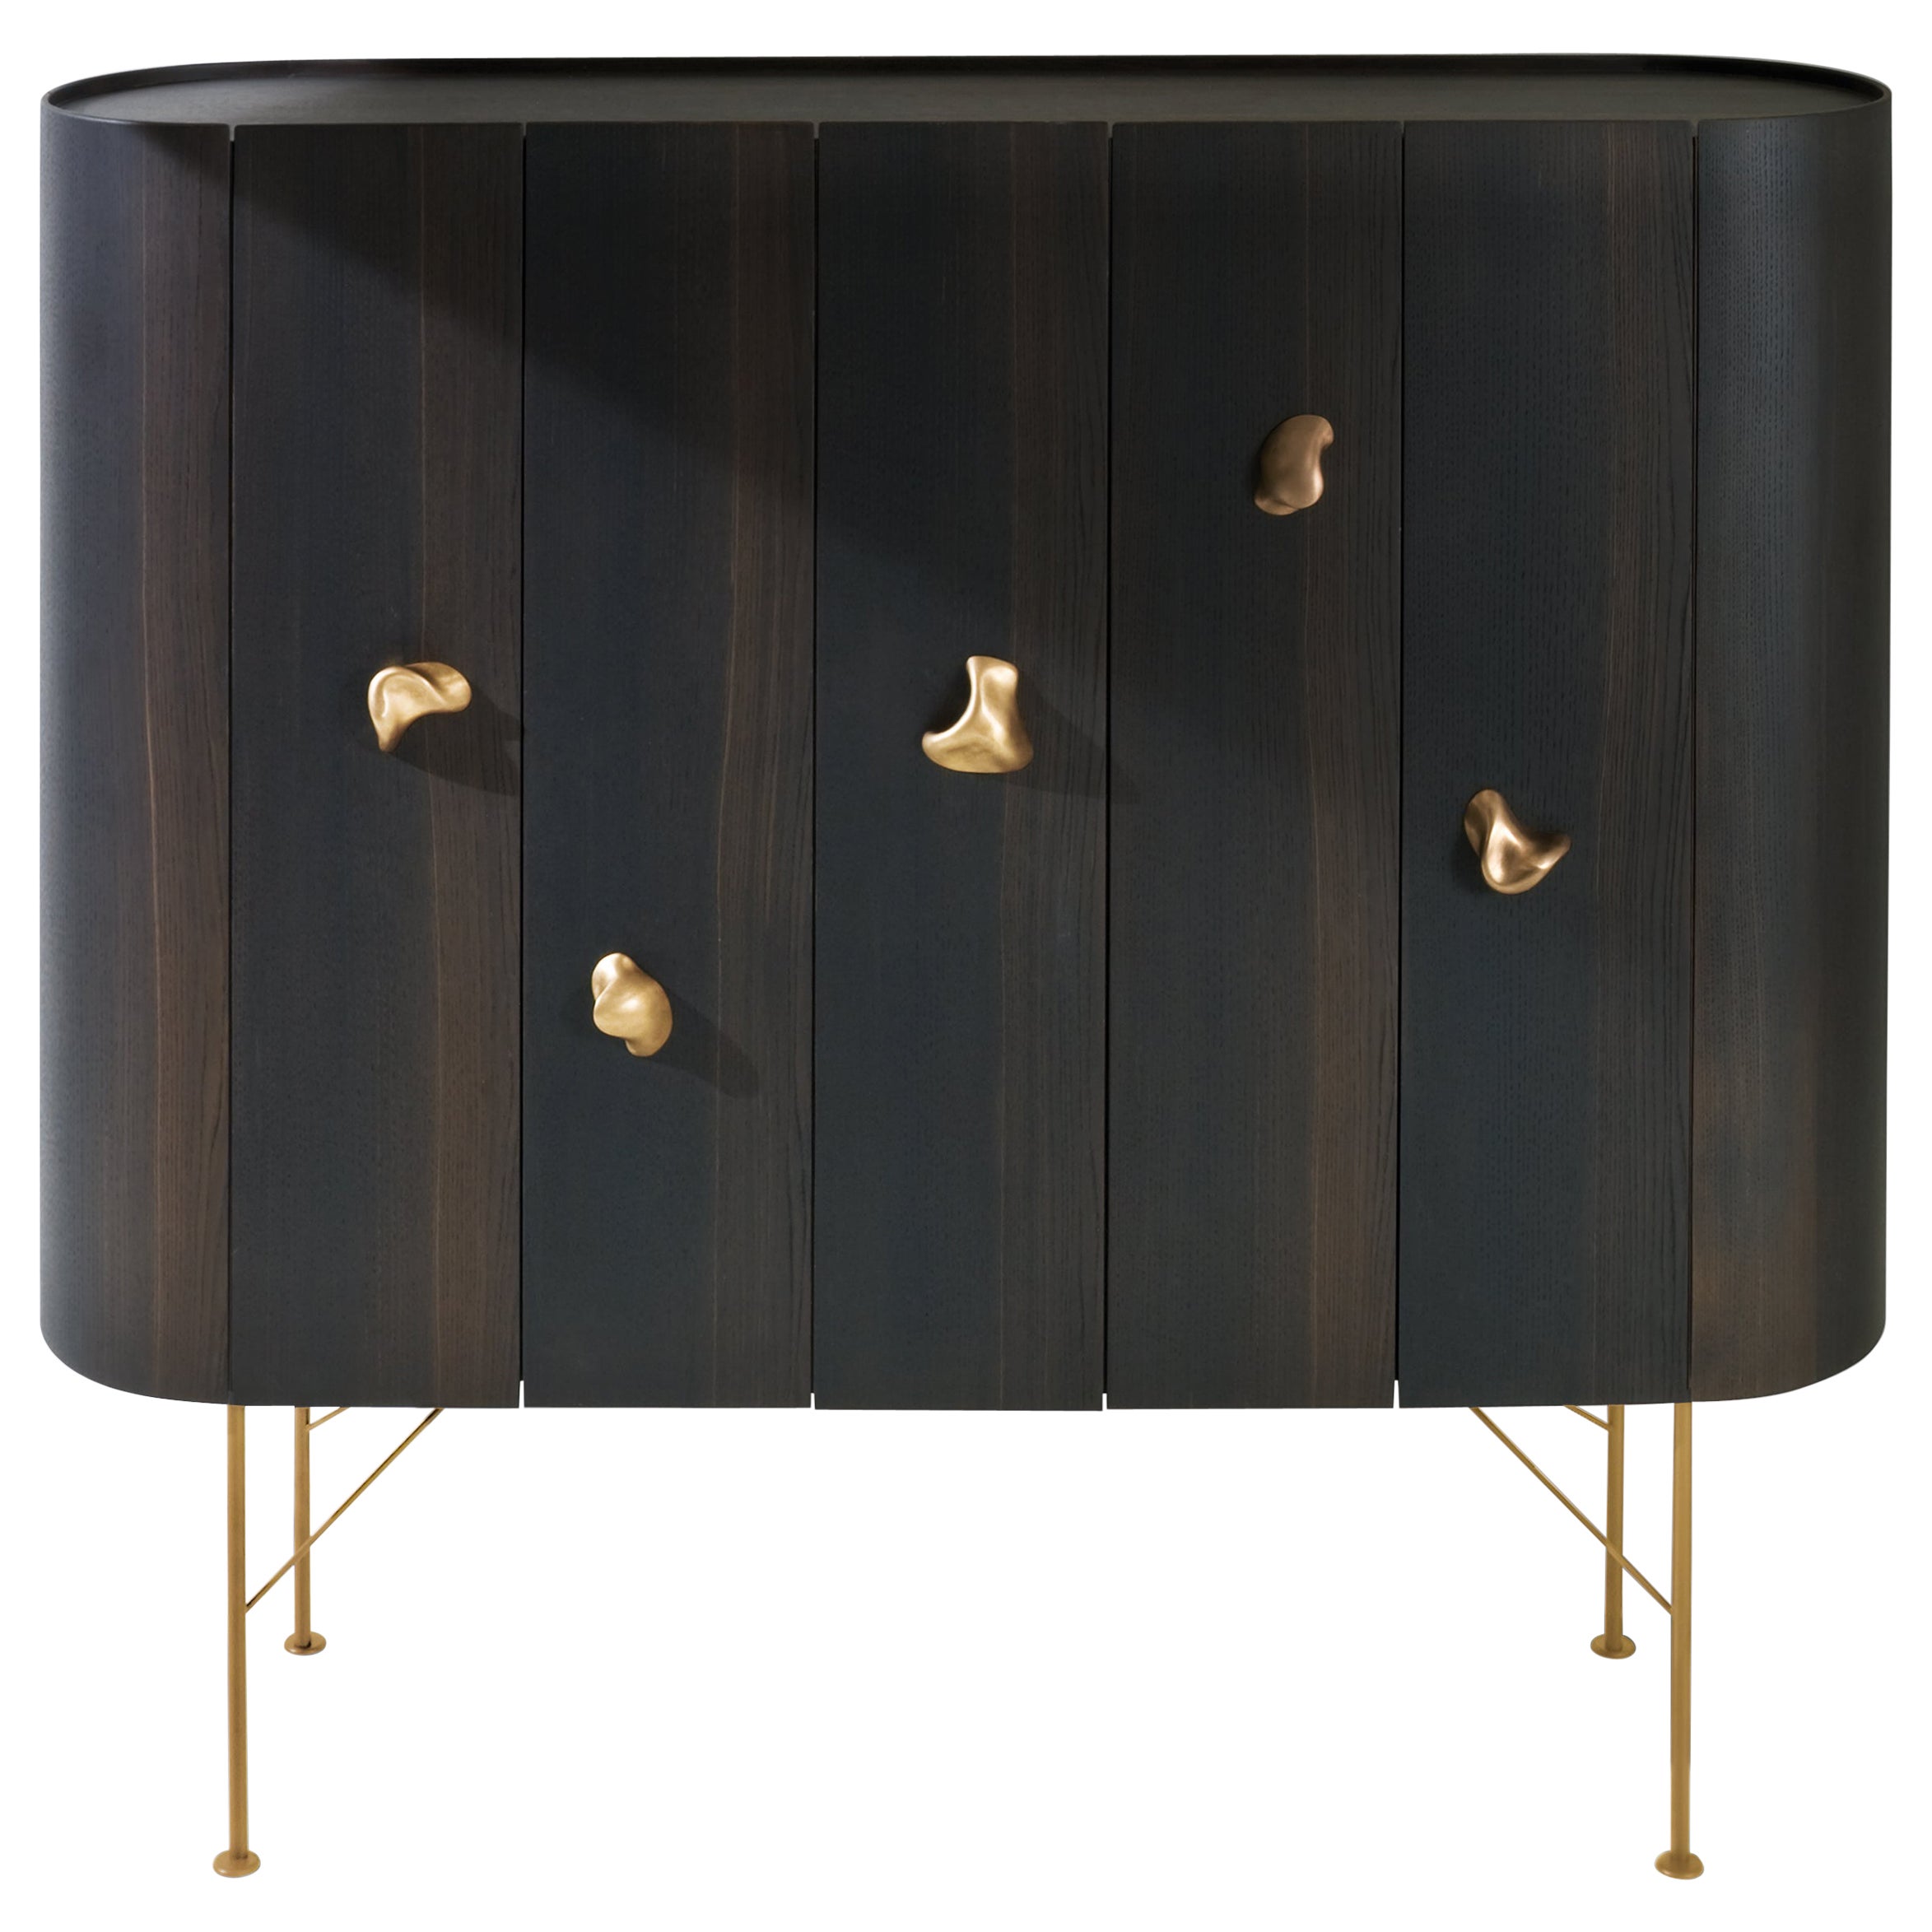 Laurameroni Modern Cabinet "Collectionist" with Sesel Brass Handles